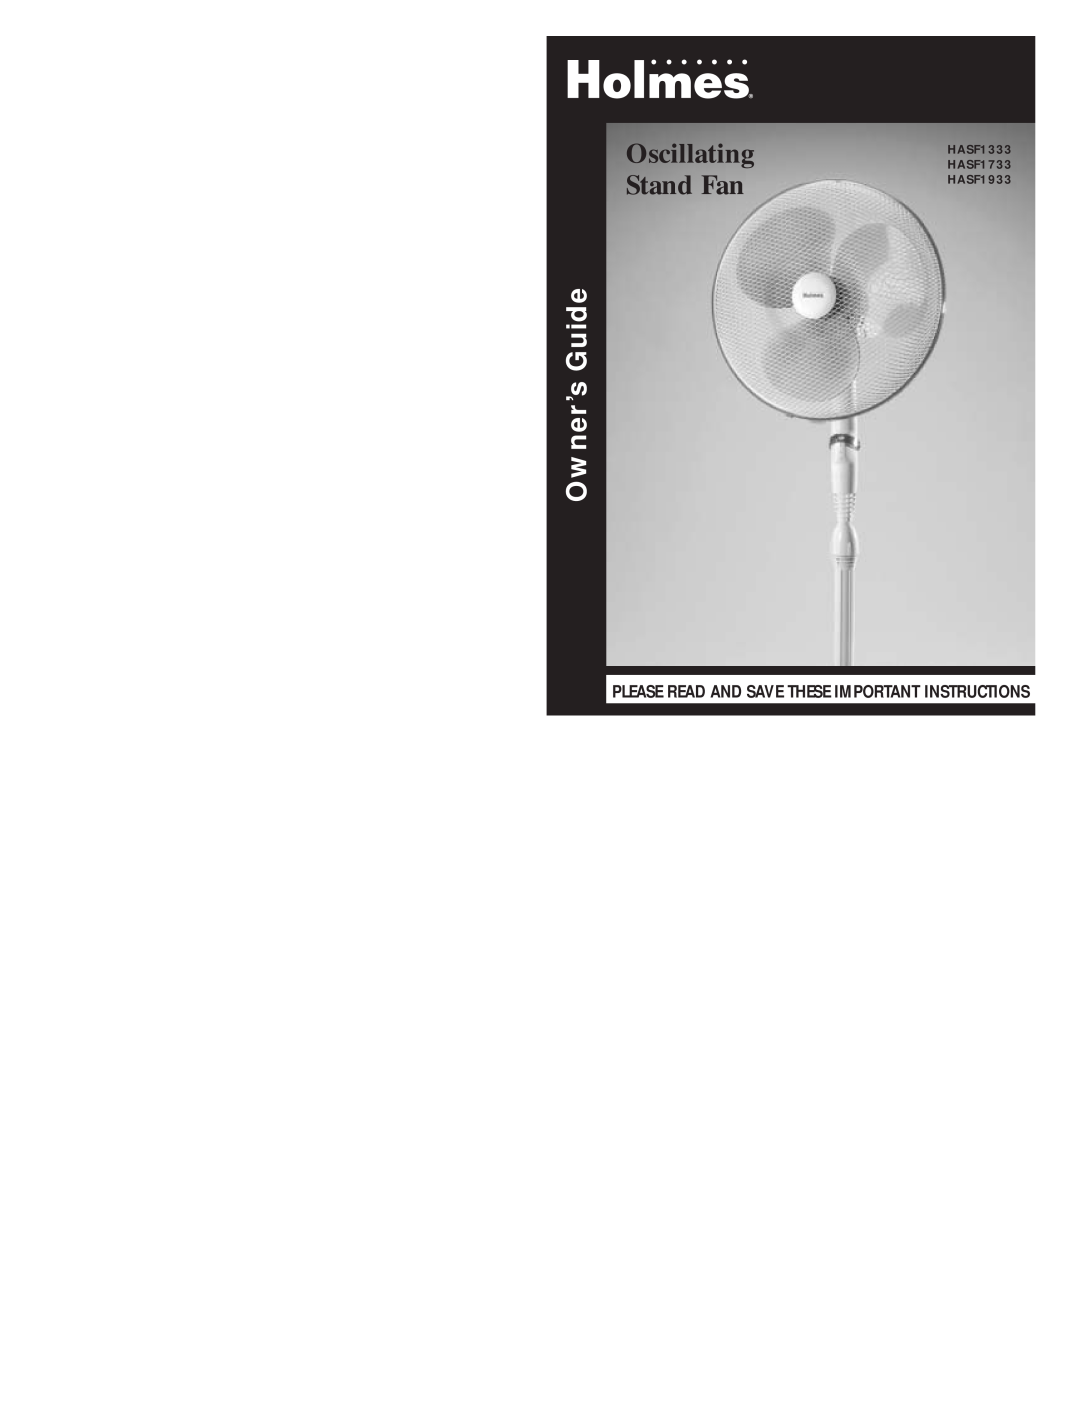 Holmes HASF1333, HASF1933 warranty Oscillating Stand Fan, Owner’s Guide, Please Read And Save These Important Instructions 